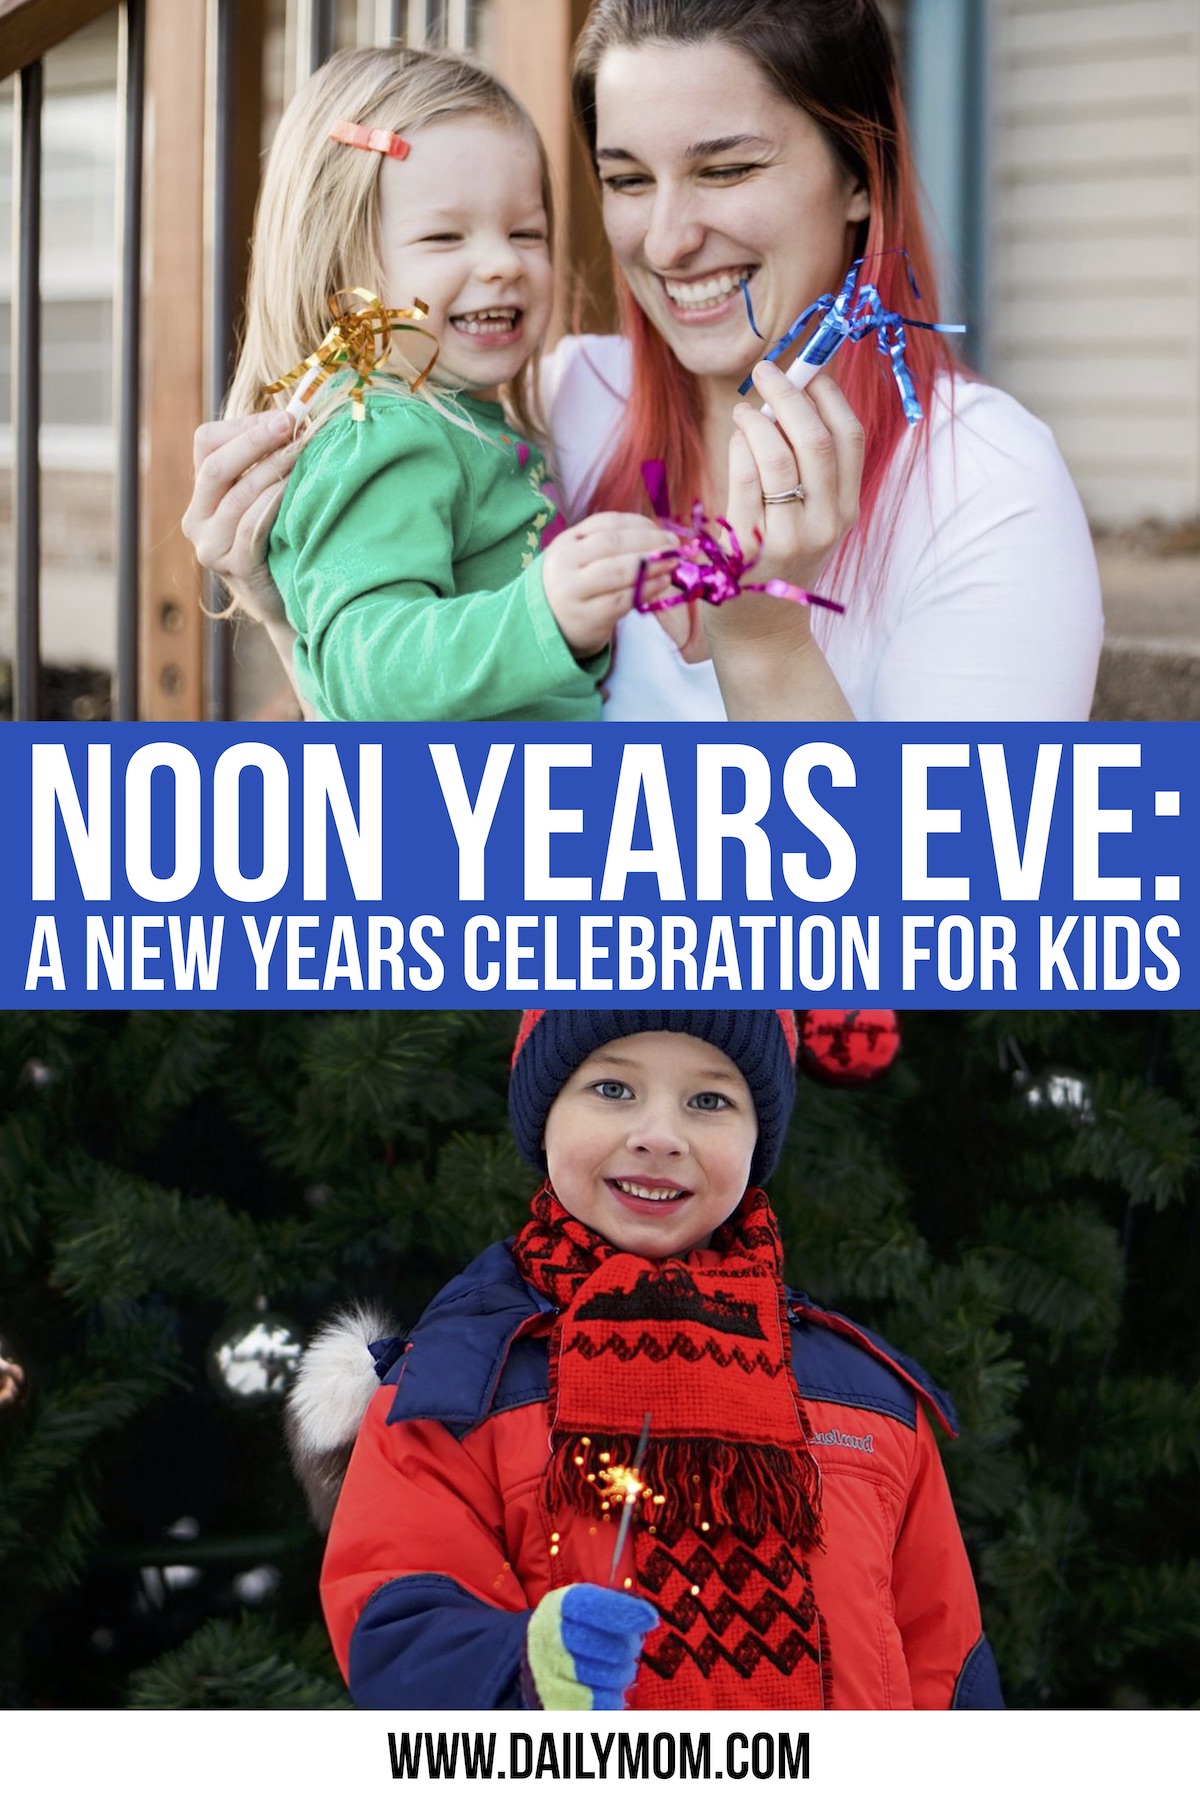 daily-mom-parent-portal-A Unique New Year’s Eve For Kids: Celebrating At Noon!